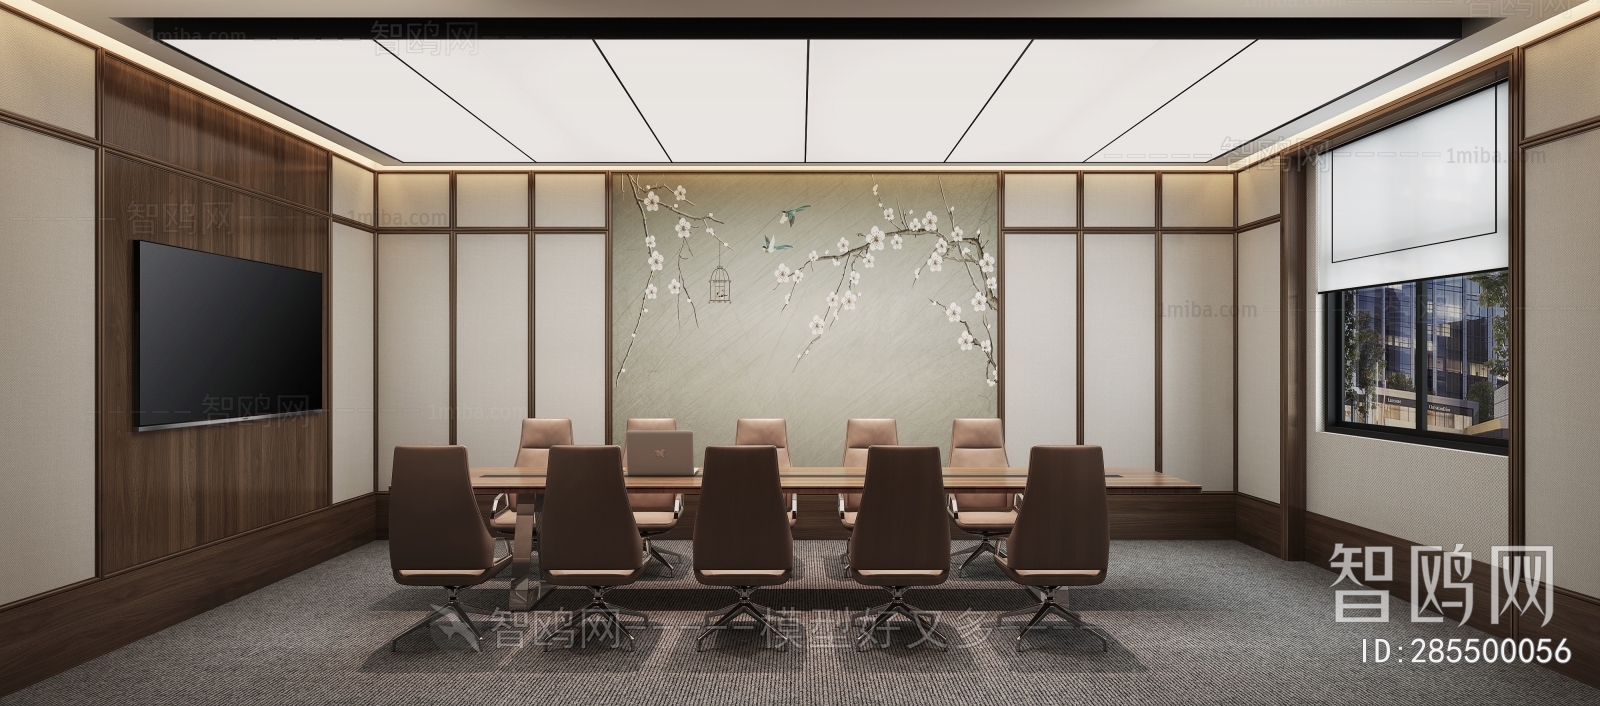 Modern New Chinese Style Meeting Room